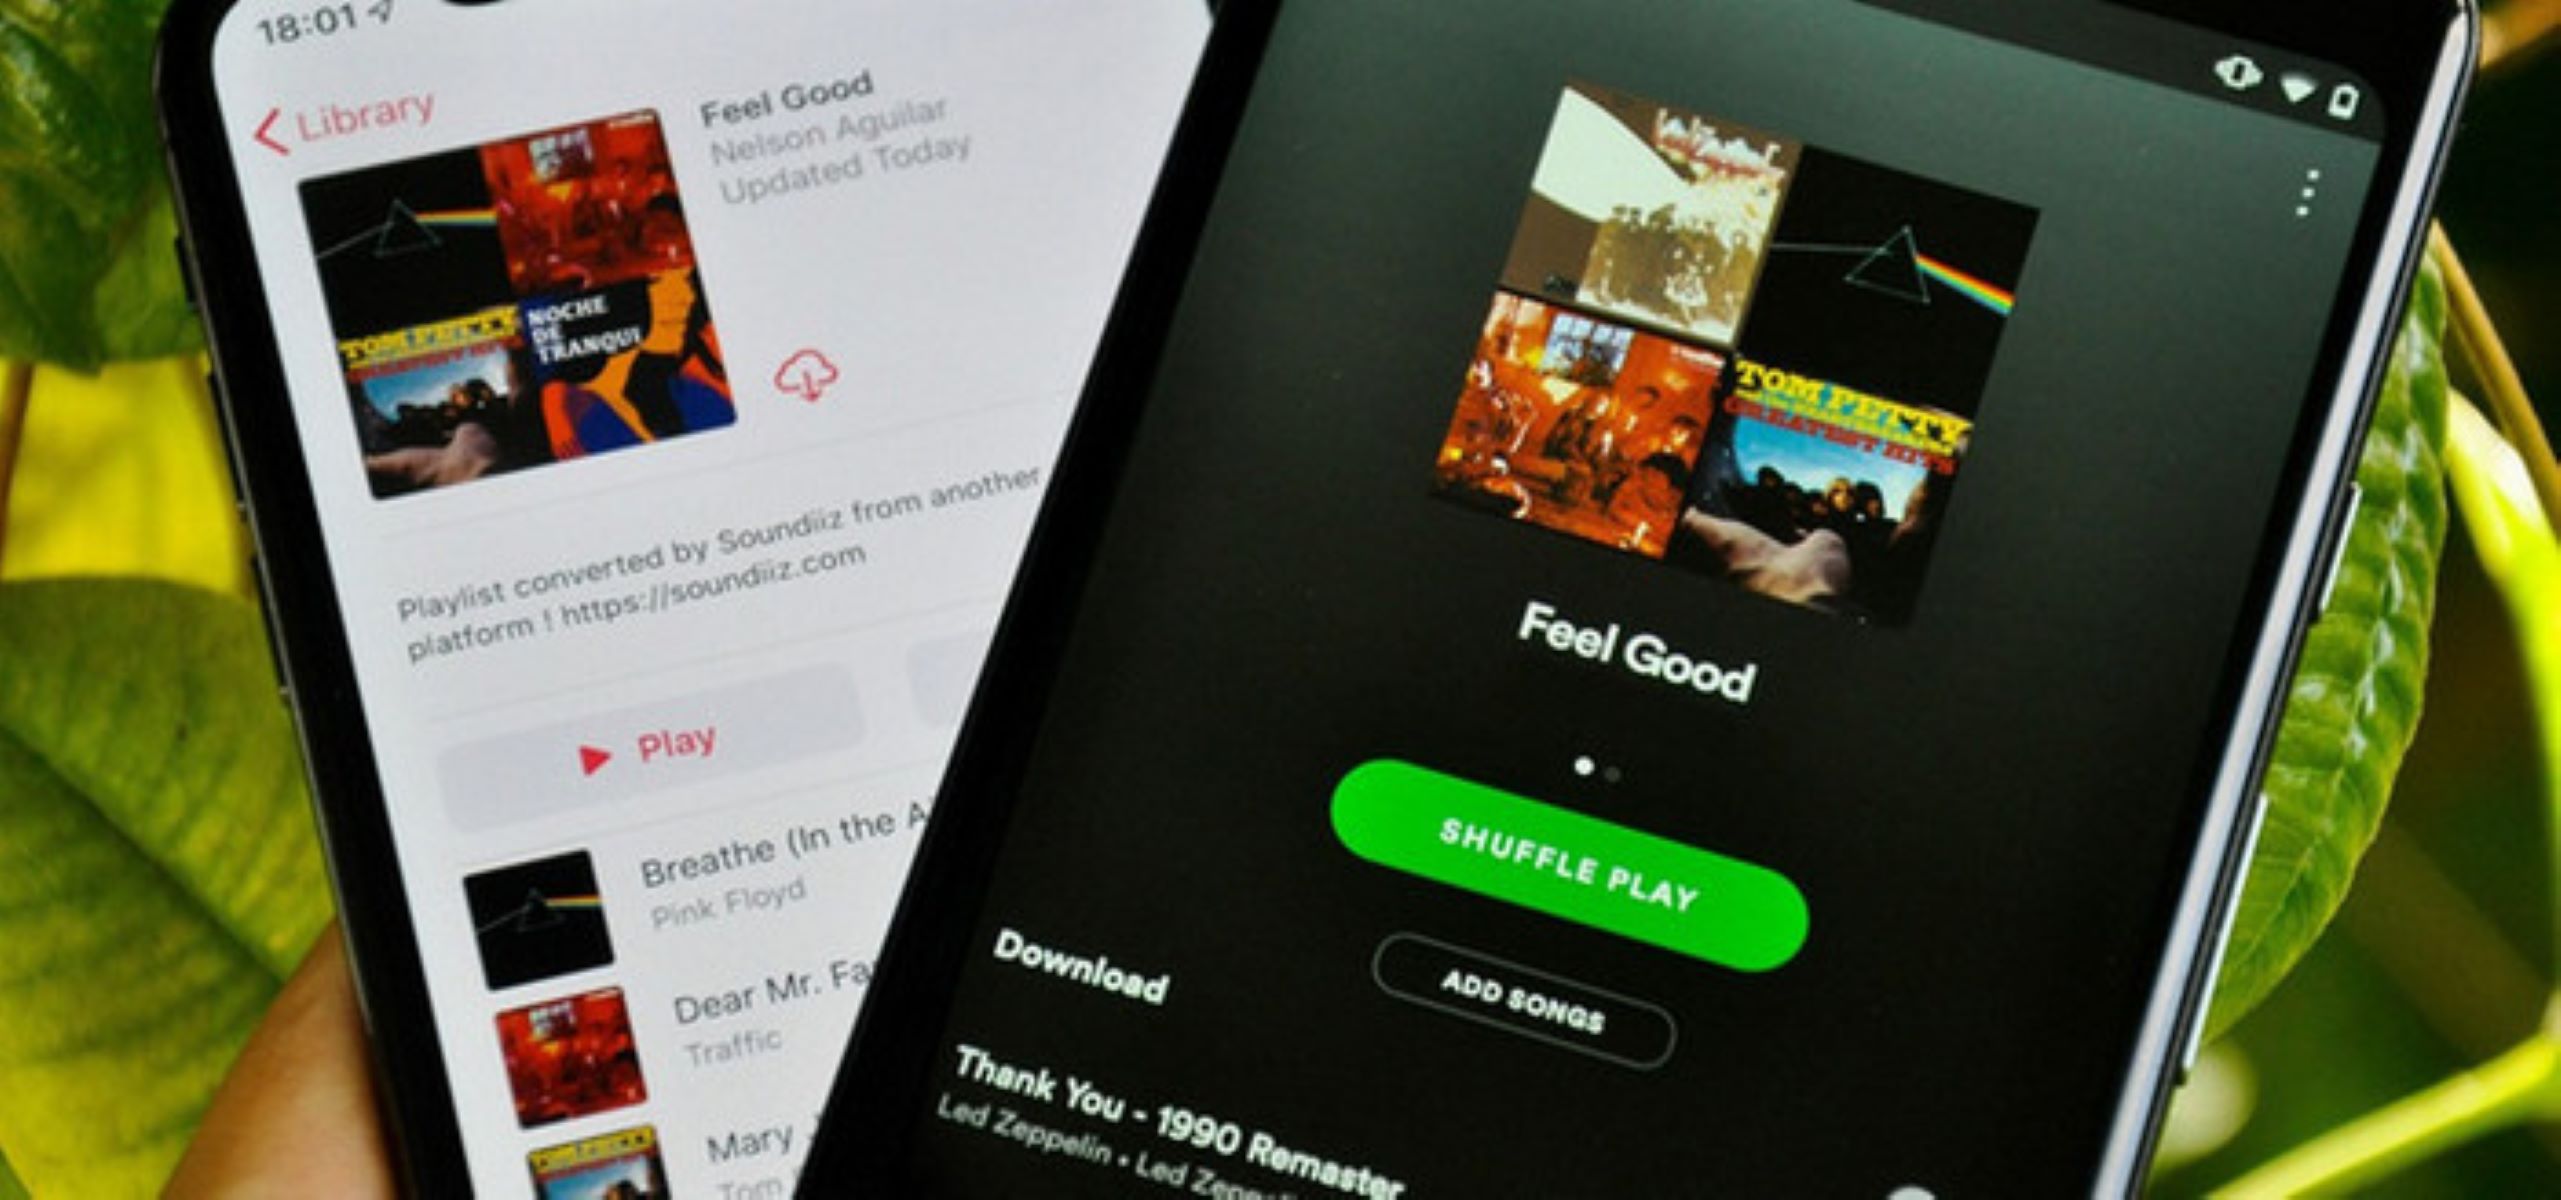 How To Transfer A Playlist From Spotify To Apple Music